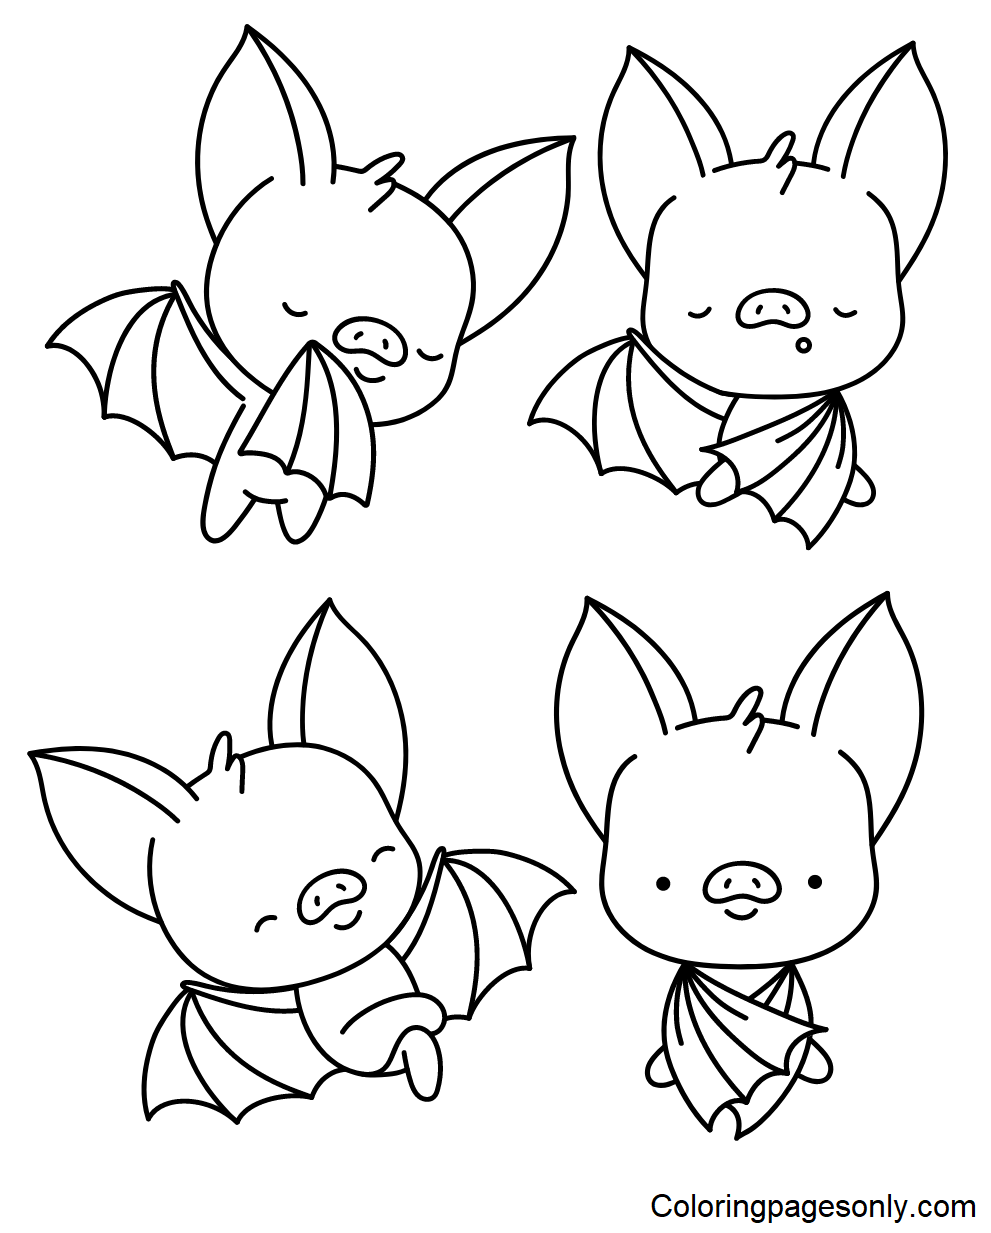 Four Bats for Kids Coloring Pages